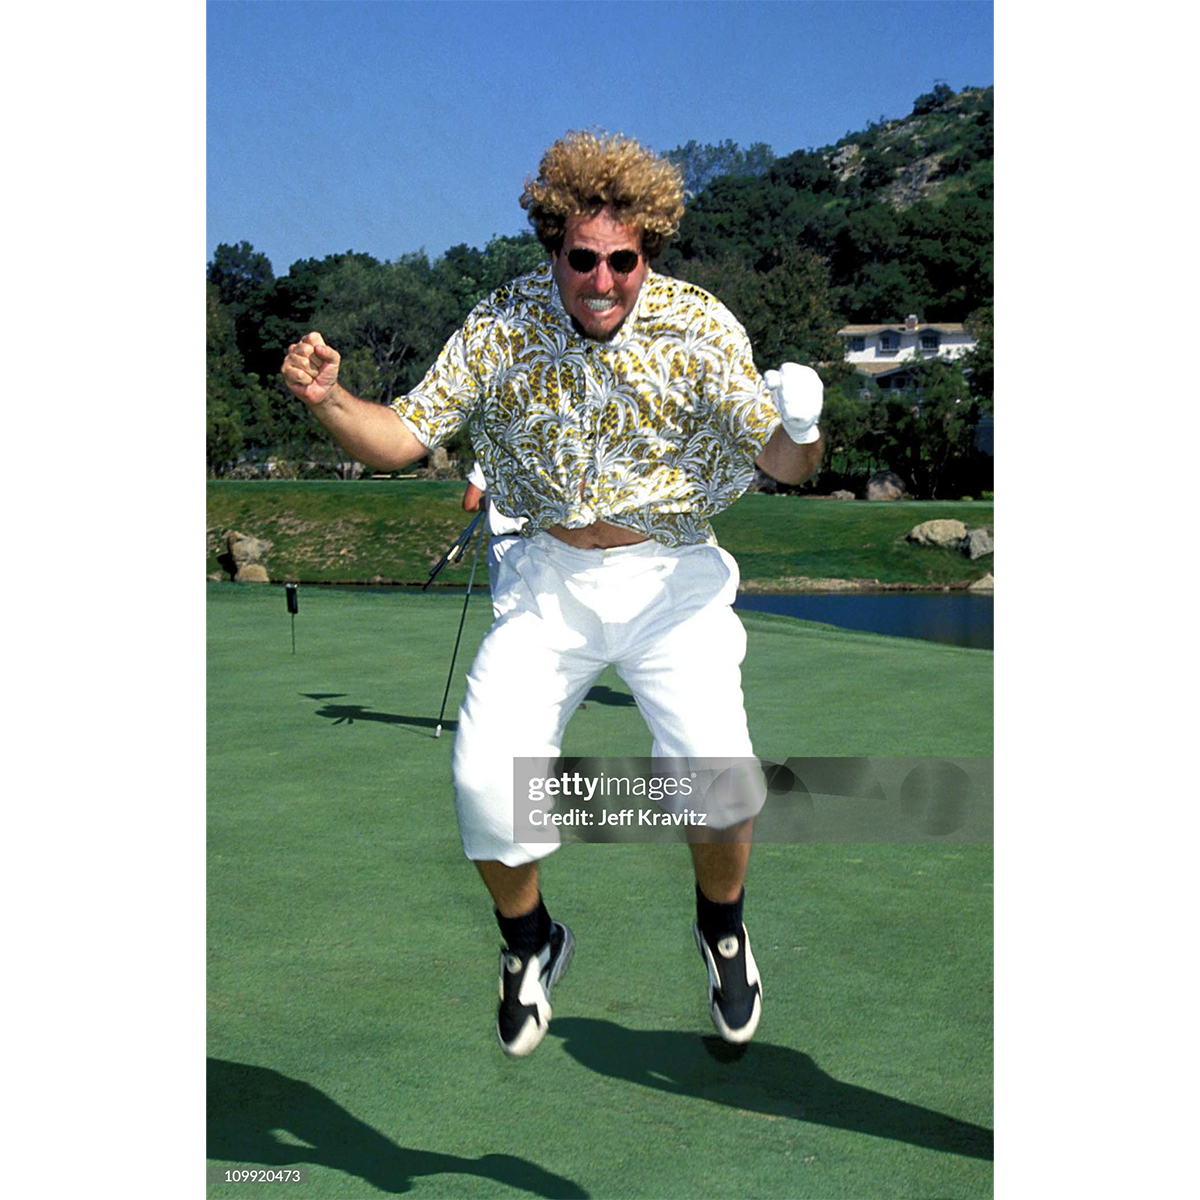 Kari and I back in 1994 at Eddie's charity golf tournament. What an eclectic bunch of folks showed up for this one. I don't even play golf but what a cool event #Golf #BigFun #WackyHairdo #WhatWasIThinking